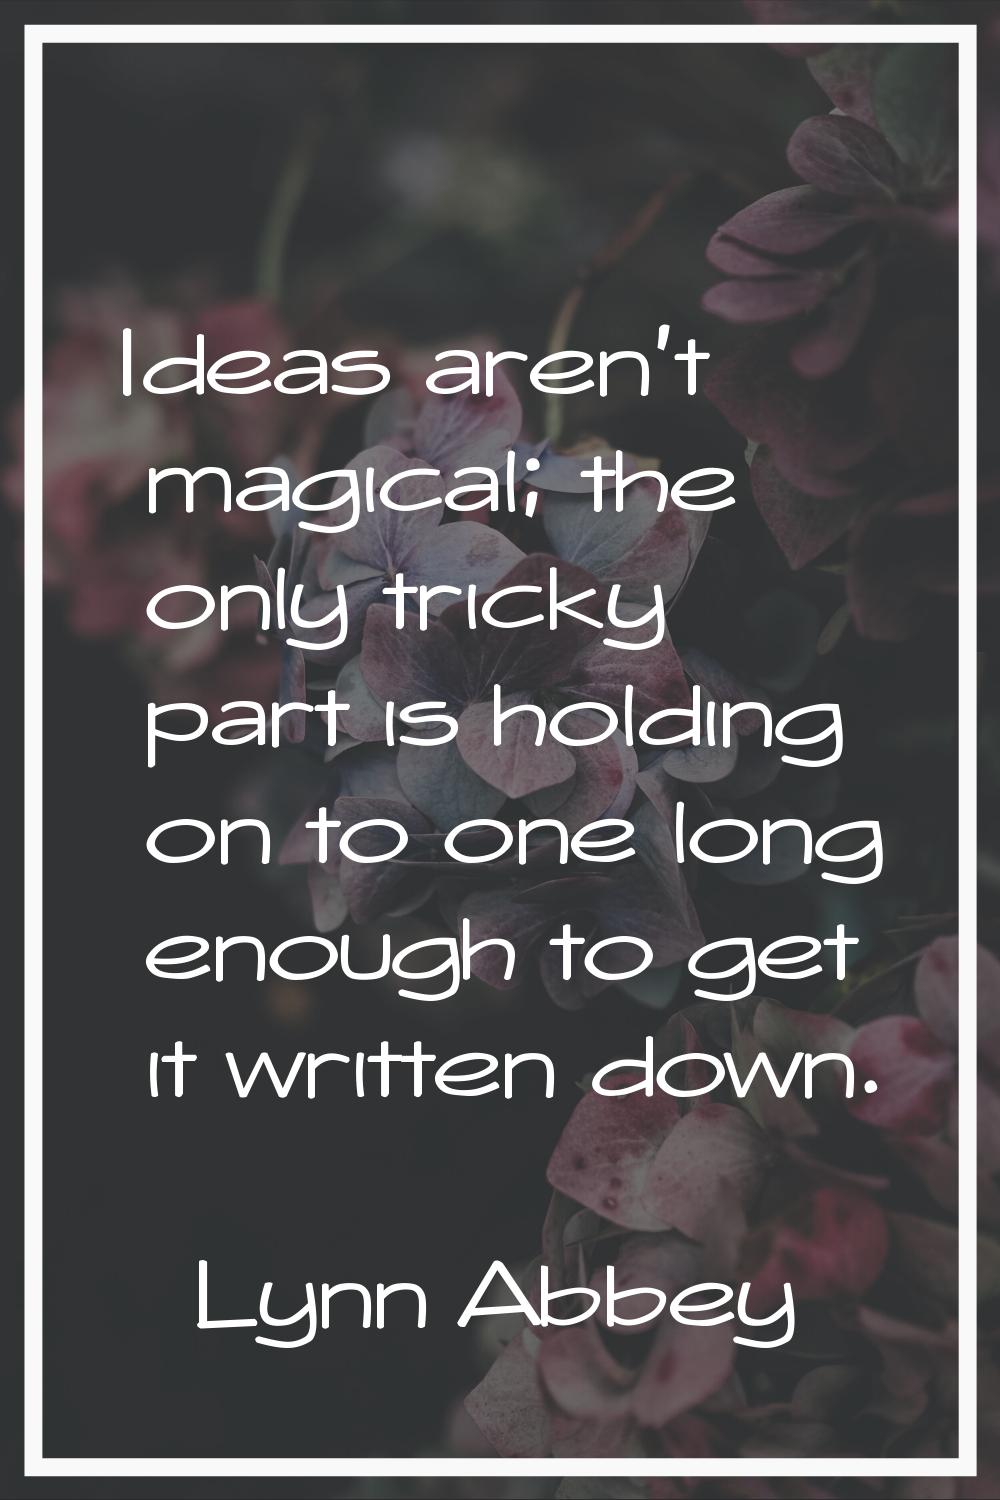 Ideas aren't magical; the only tricky part is holding on to one long enough to get it written down.